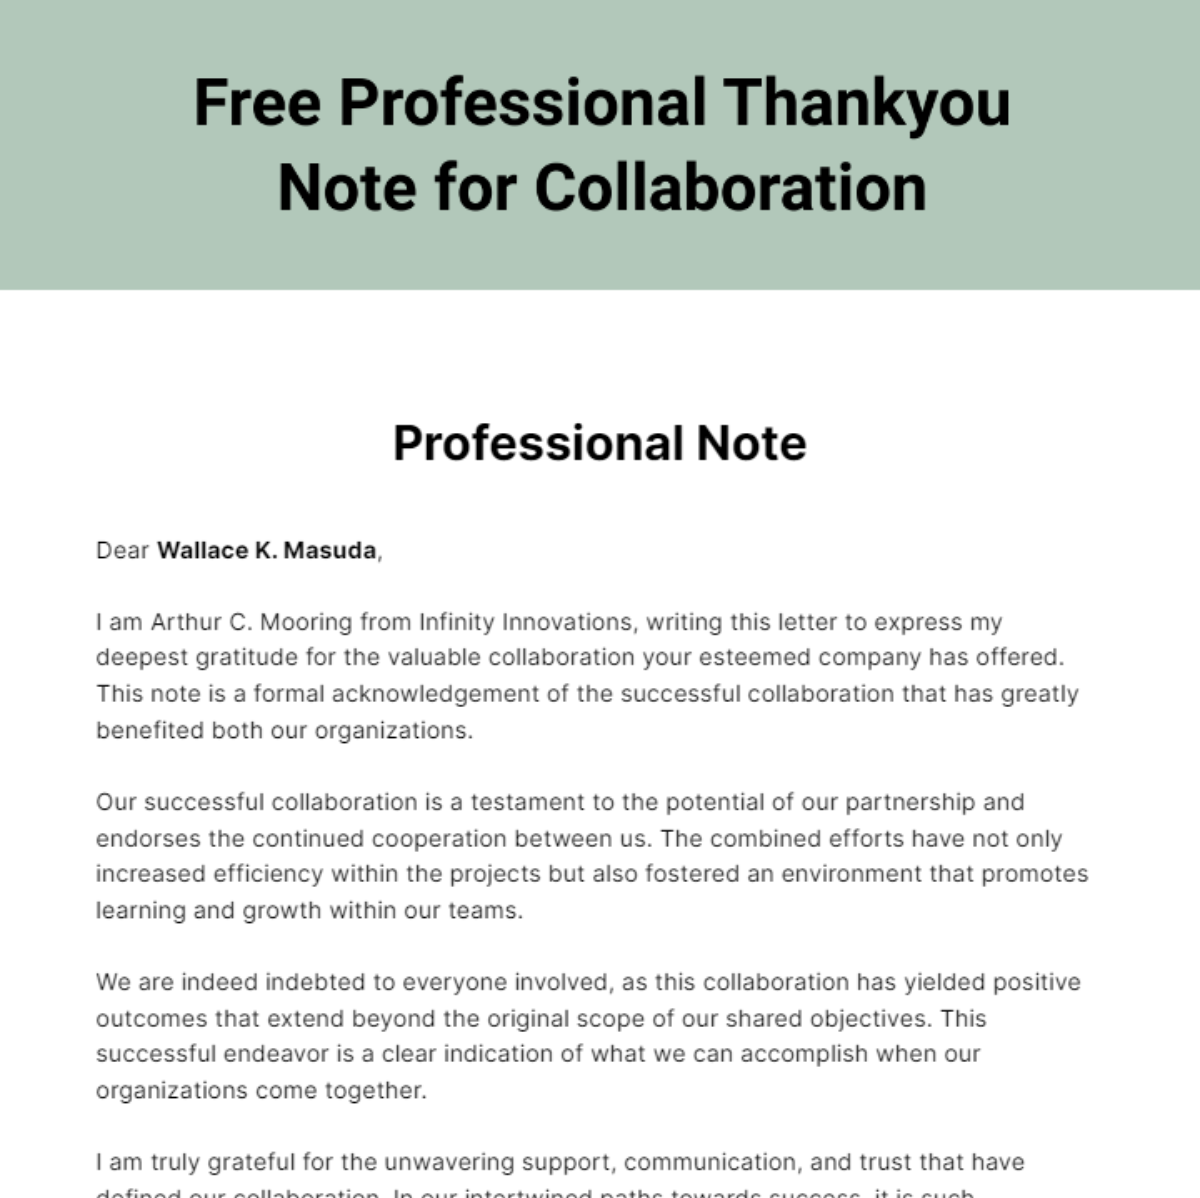 Free Professional Thankyou Note for Collaboration Template